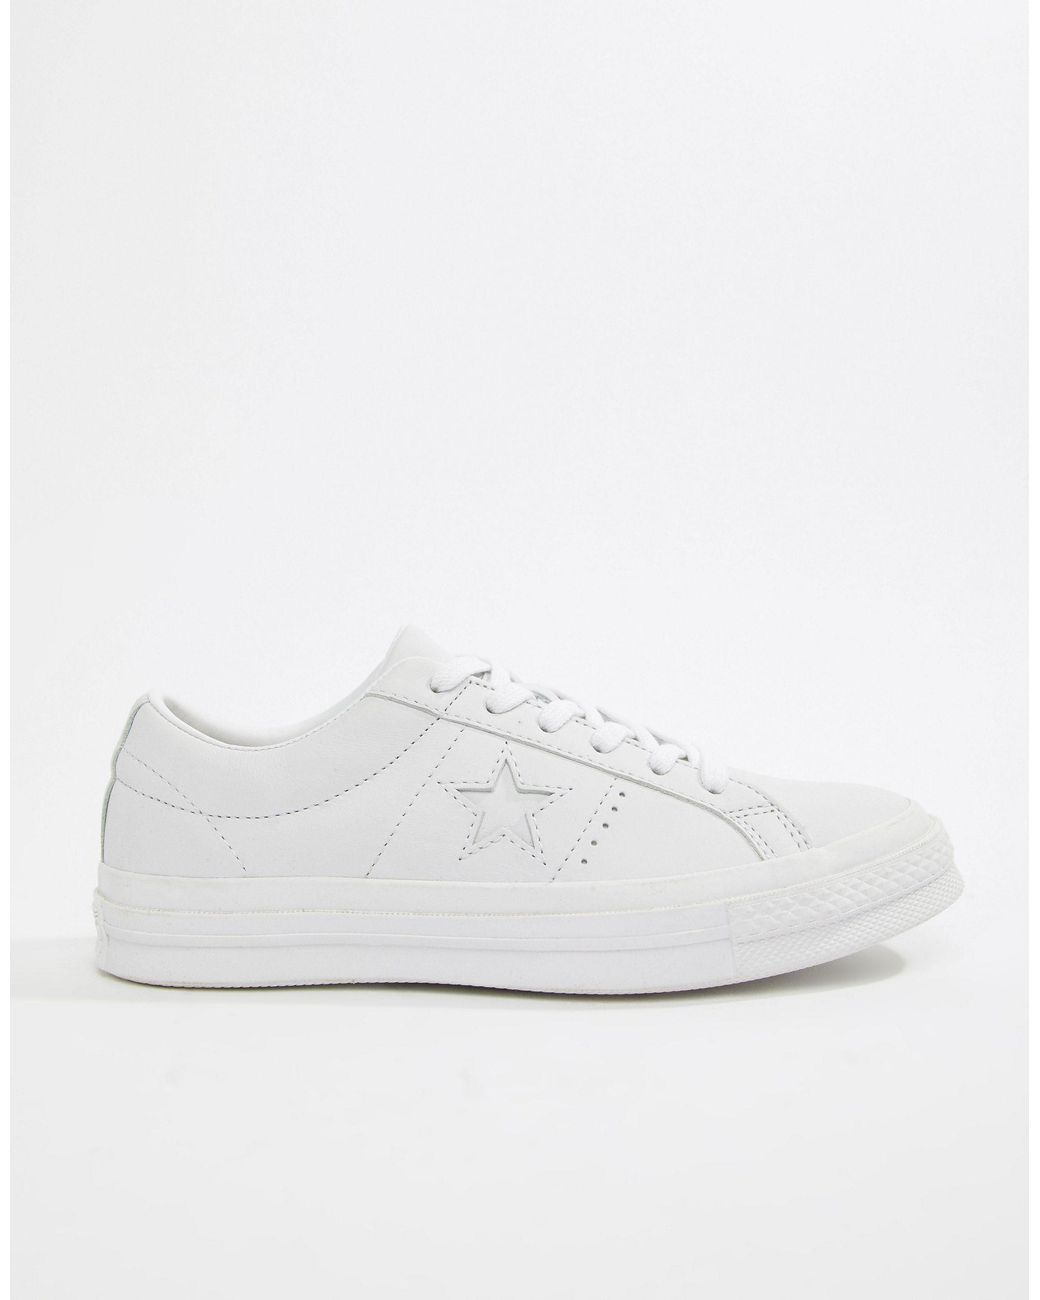 converse one star leather 3 strap